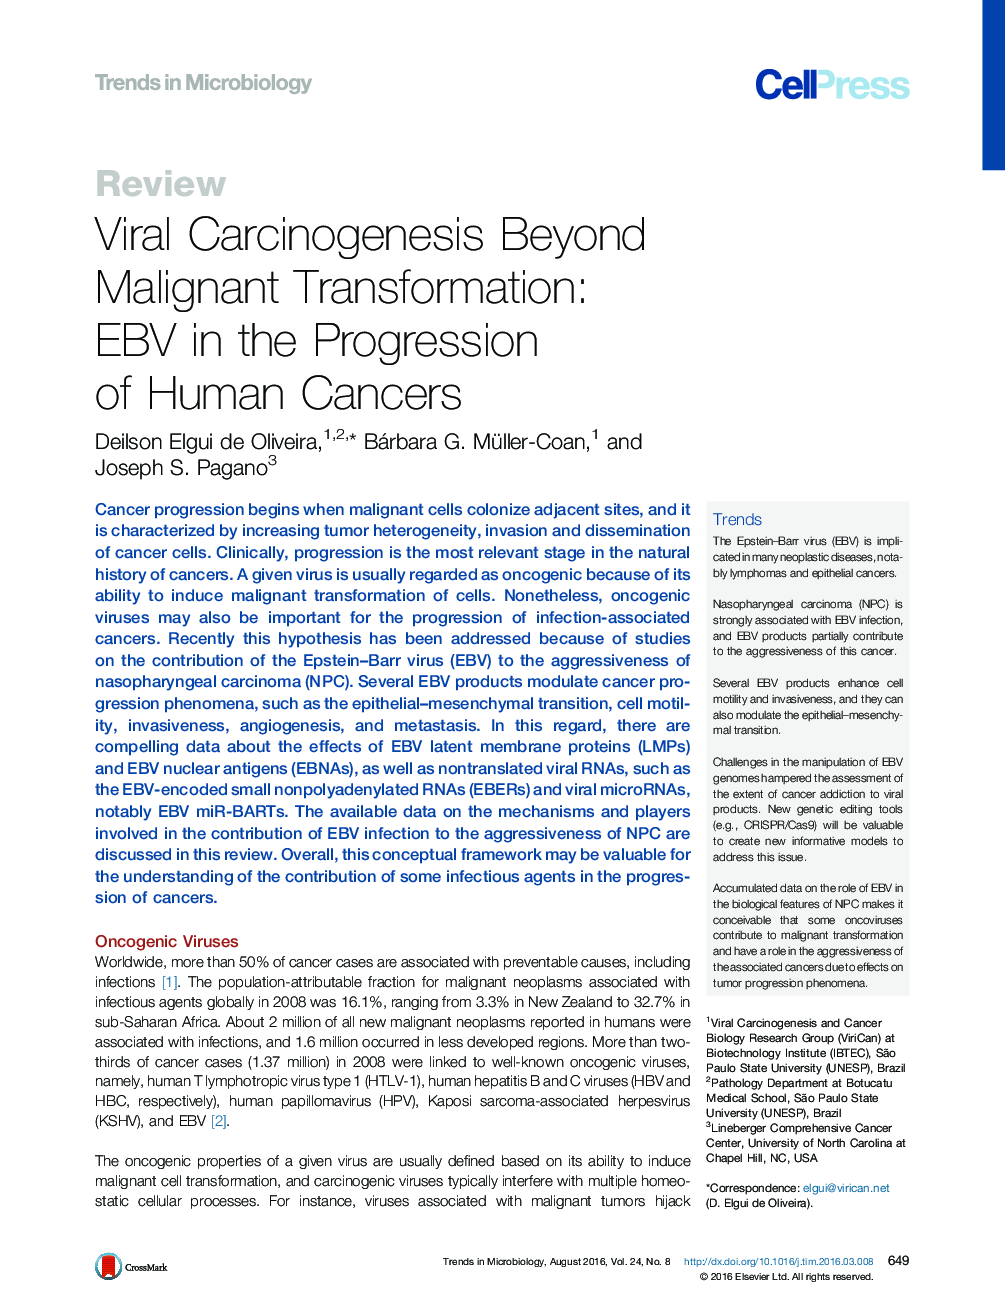 Viral Carcinogenesis Beyond Malignant Transformation: EBV in the Progression of Human Cancers